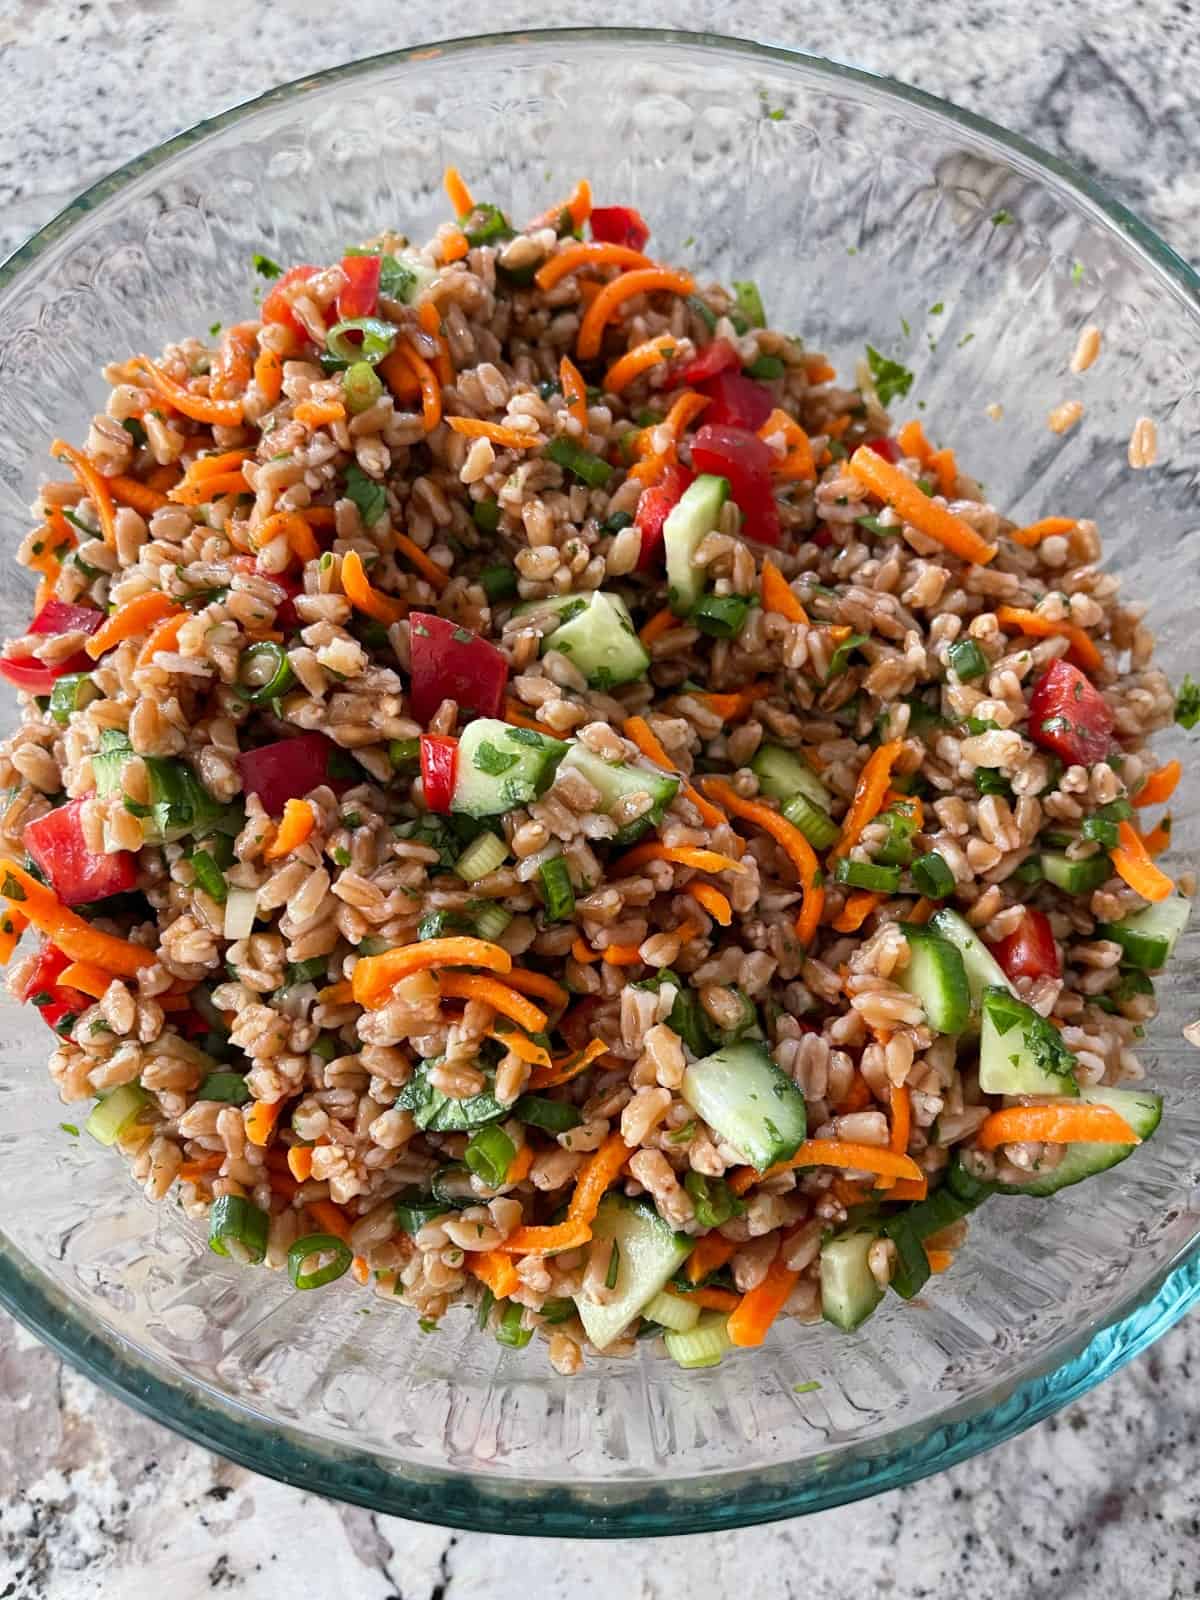 Mixing Thai-style farro salad in large glass bowl.